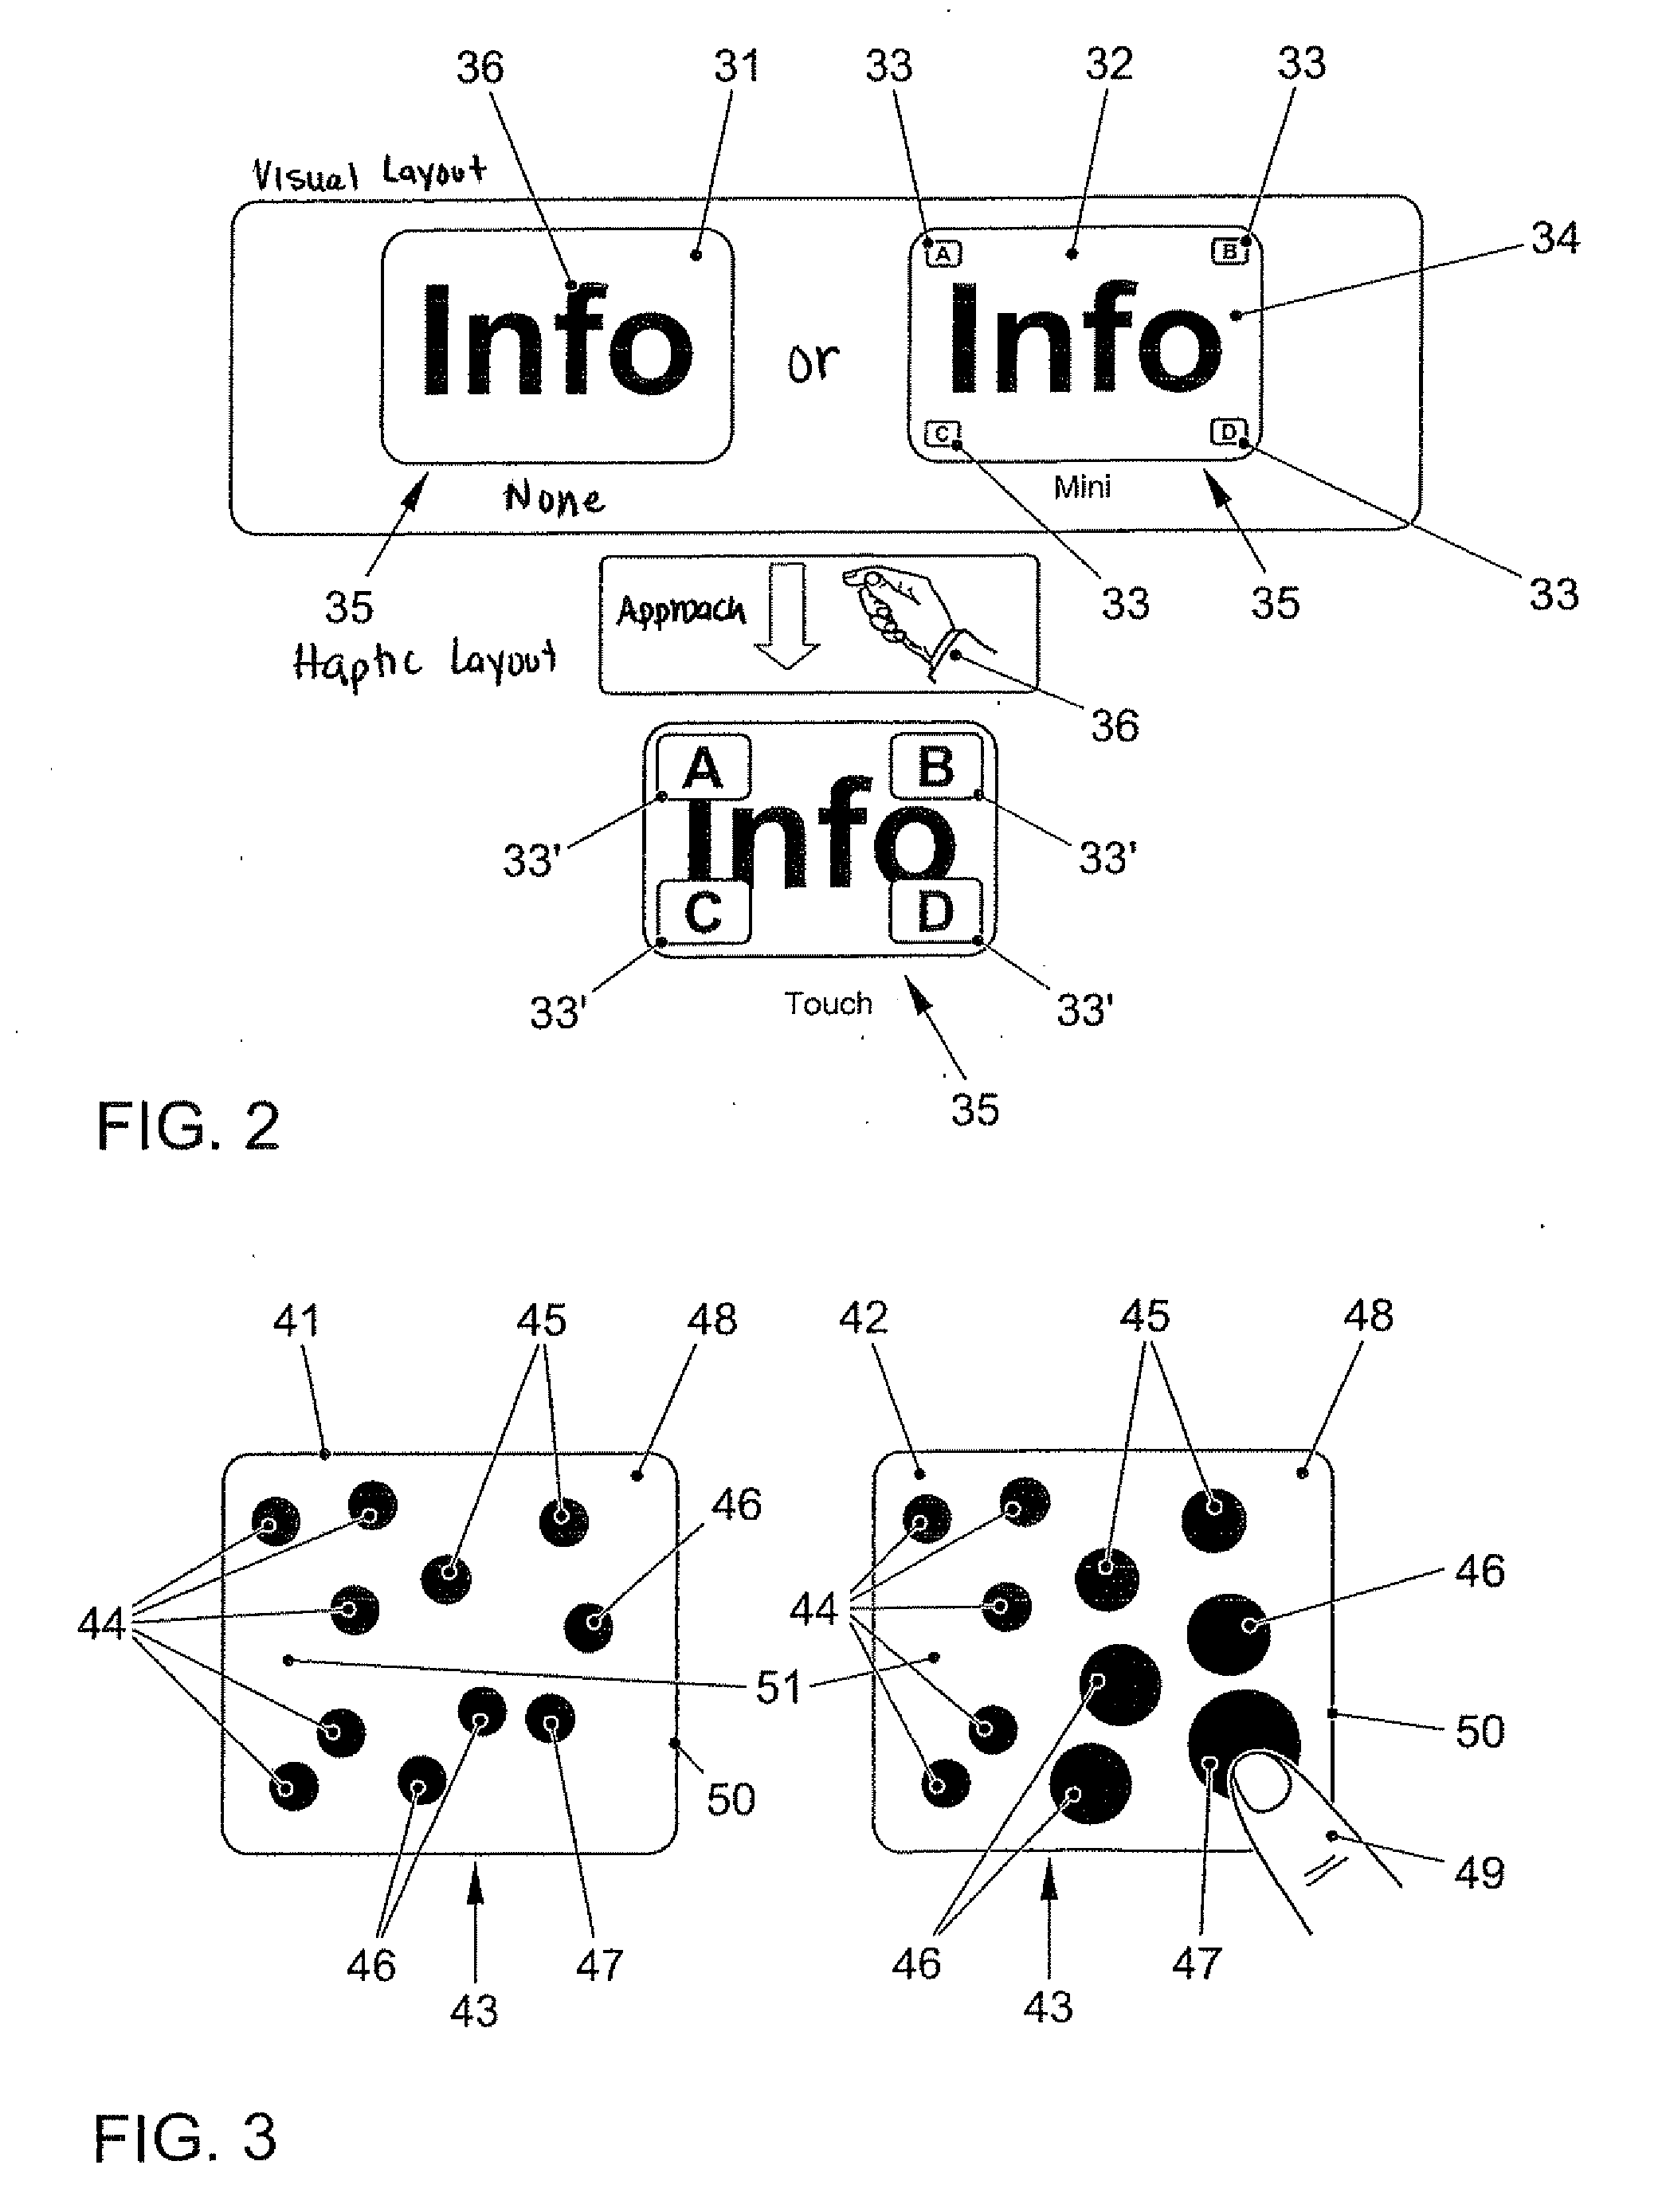 Interactive control device and method for operating the interactive control device